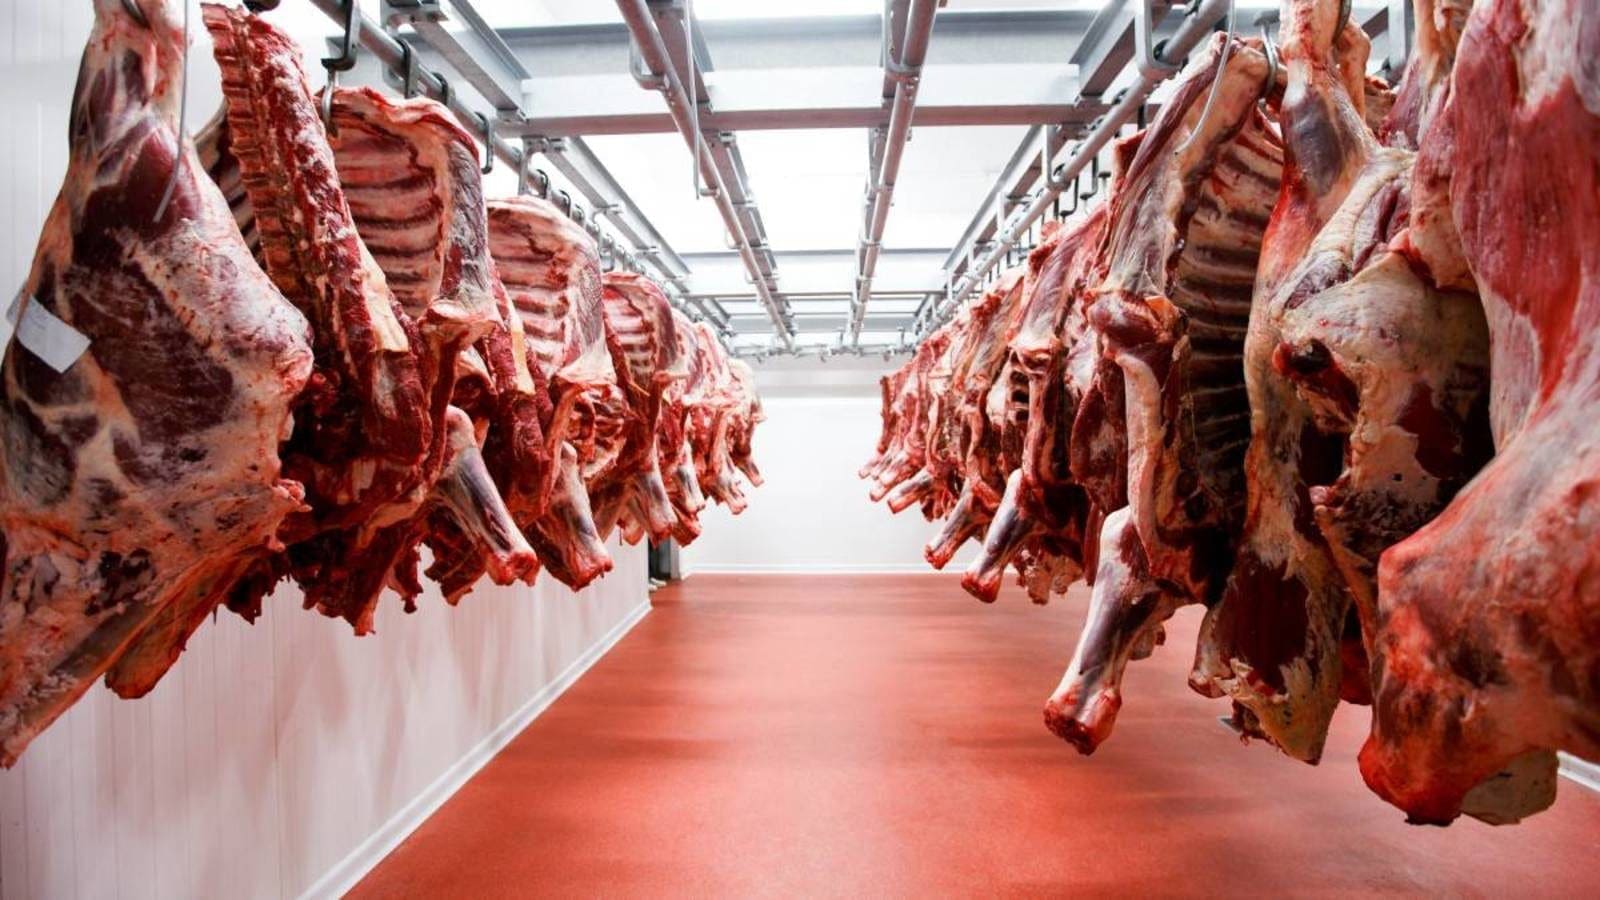 Banagher Chilling resumes construction of US$42m beef processing plant